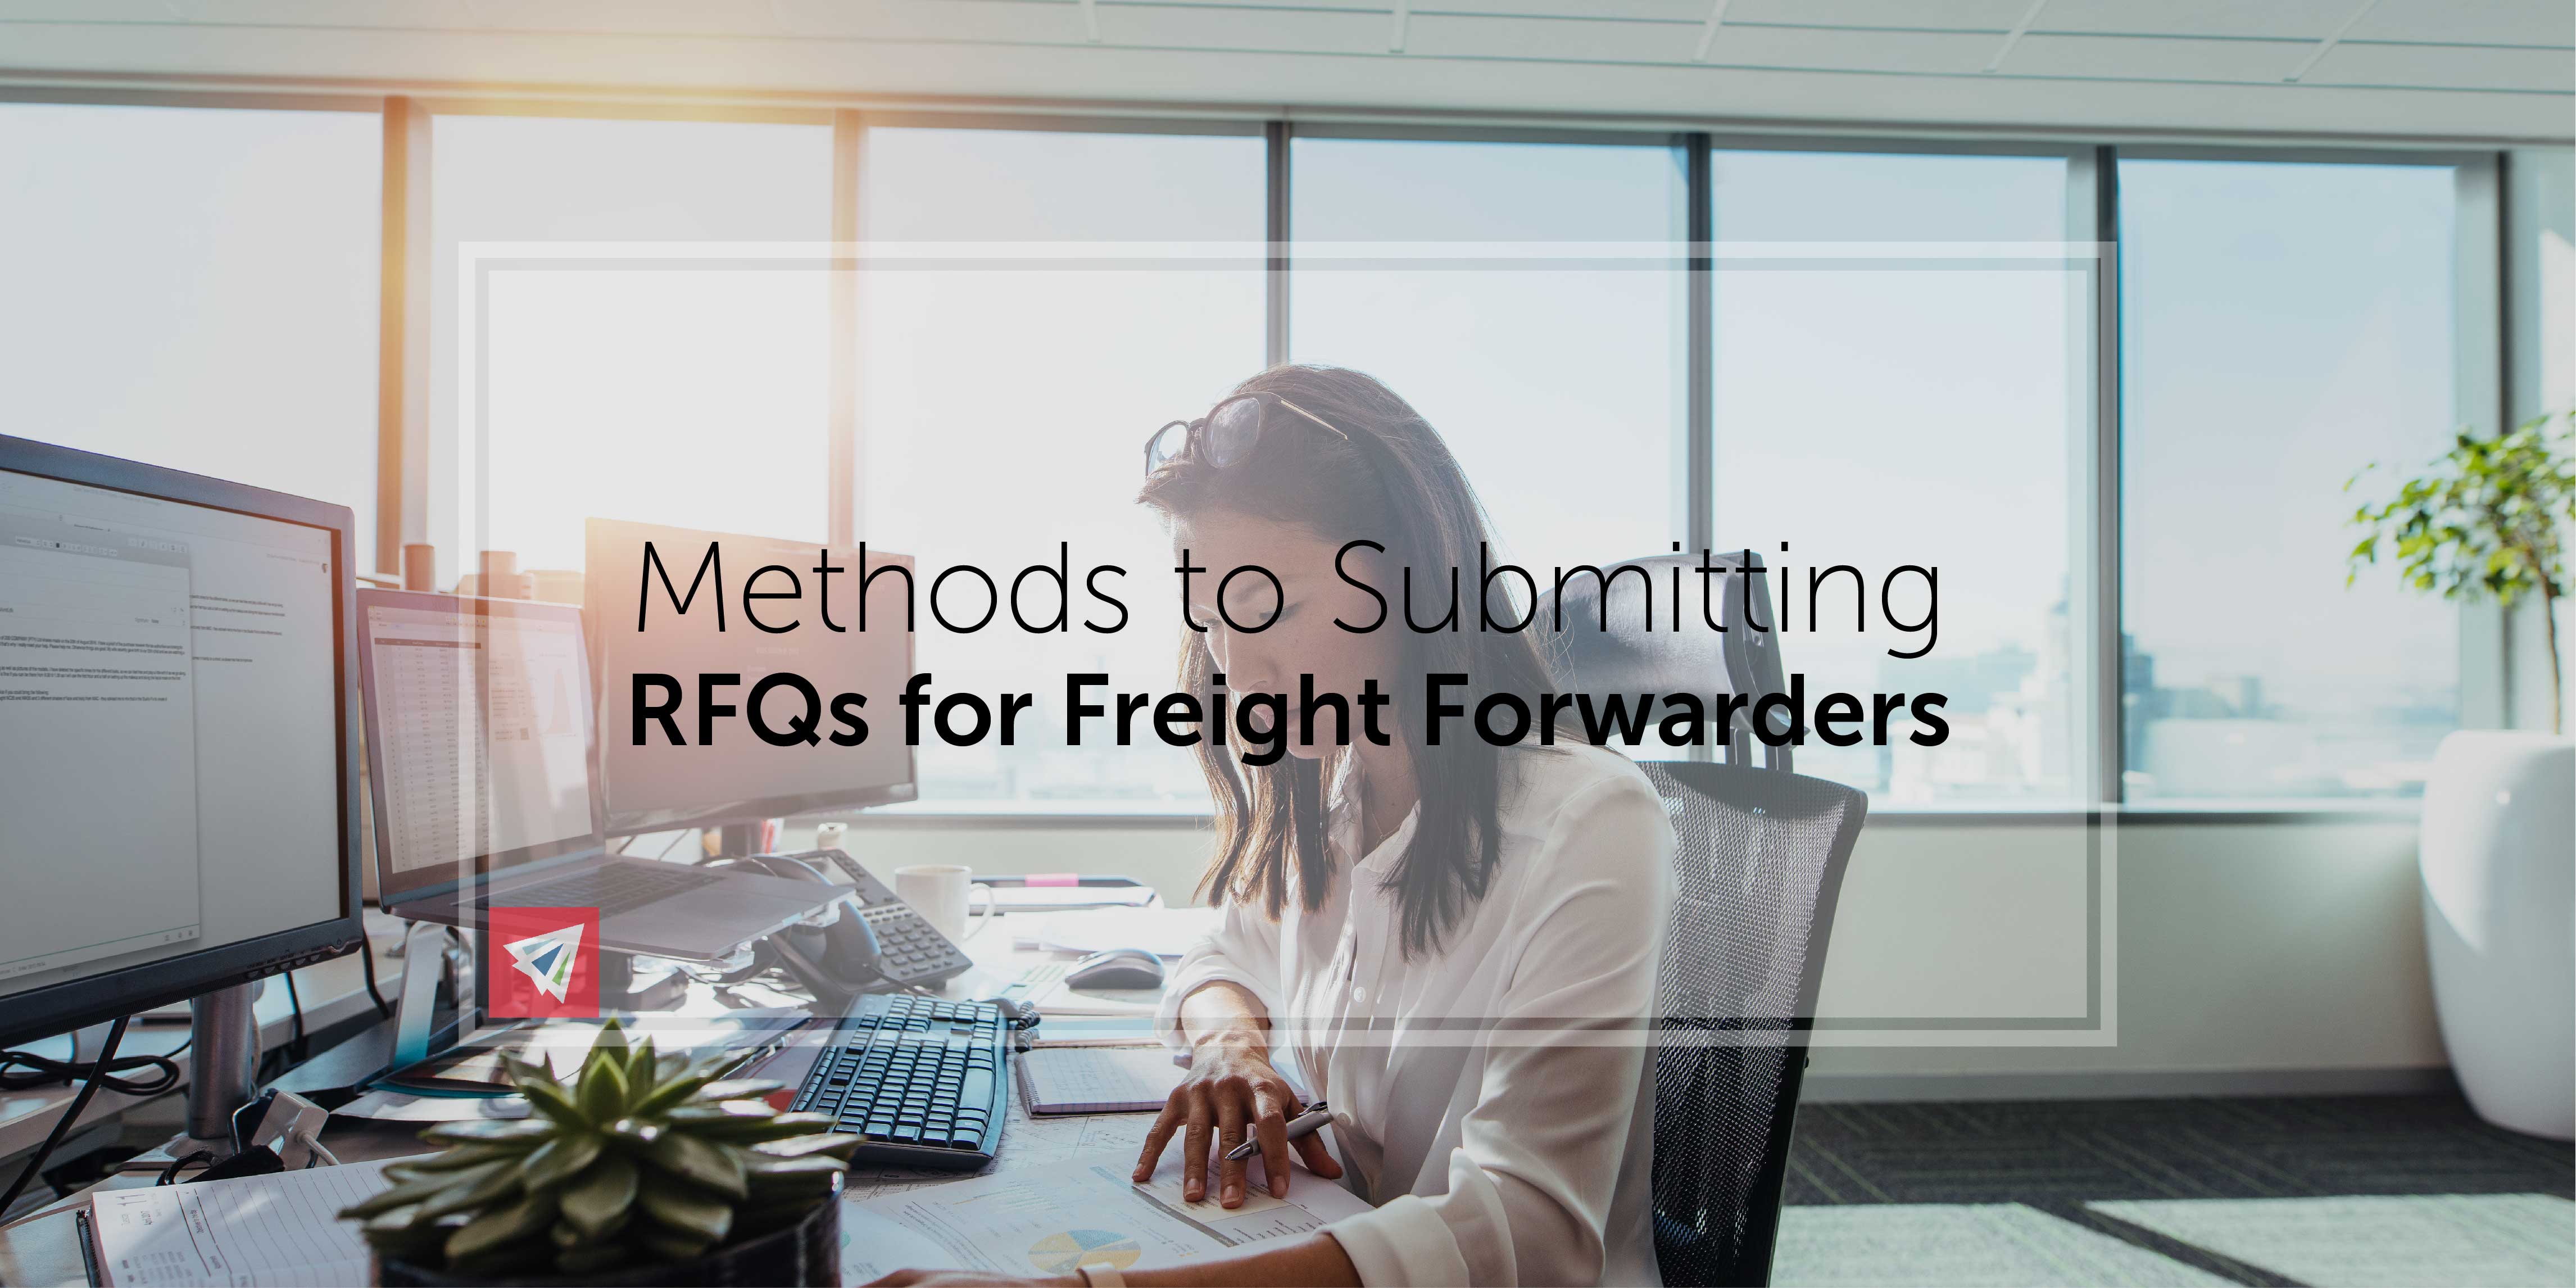 Methods to Submitting RFQs for Freight Forwarders